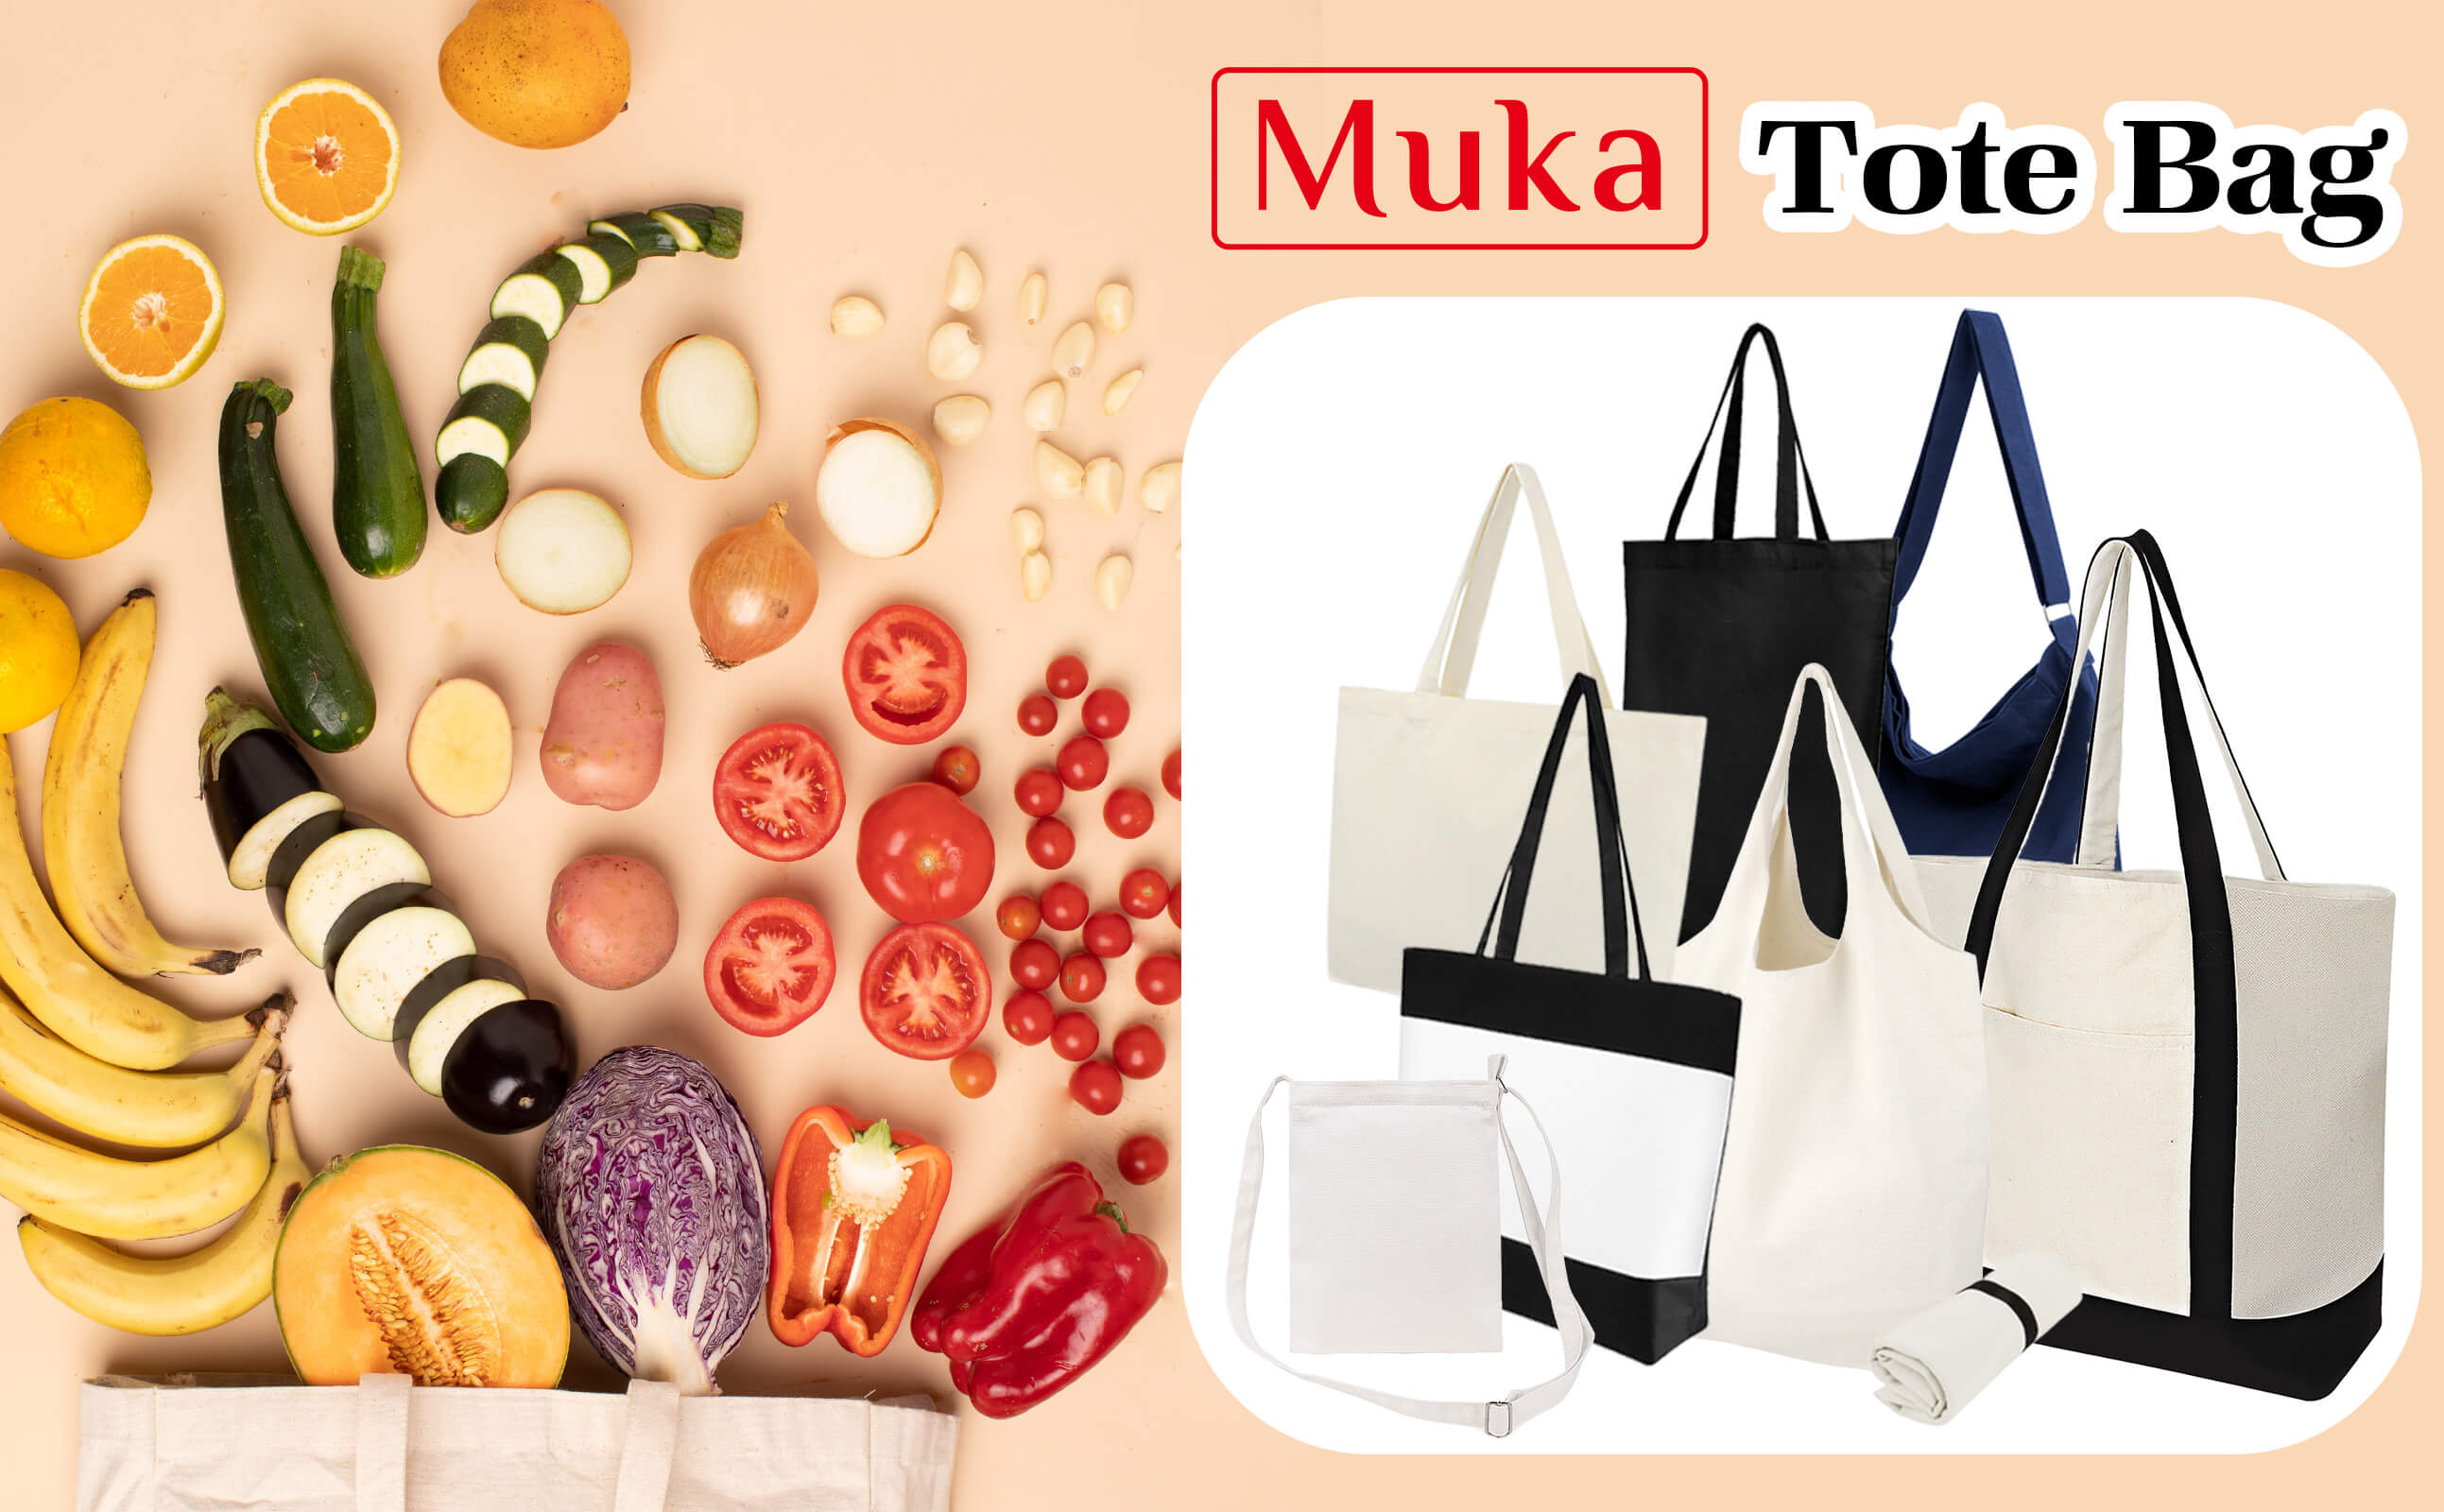 Muka Canvas Zippered Tote with Lining, Two-Tone Accent Gusseted Tote Bag, 15-1/2" x 12" x 3"